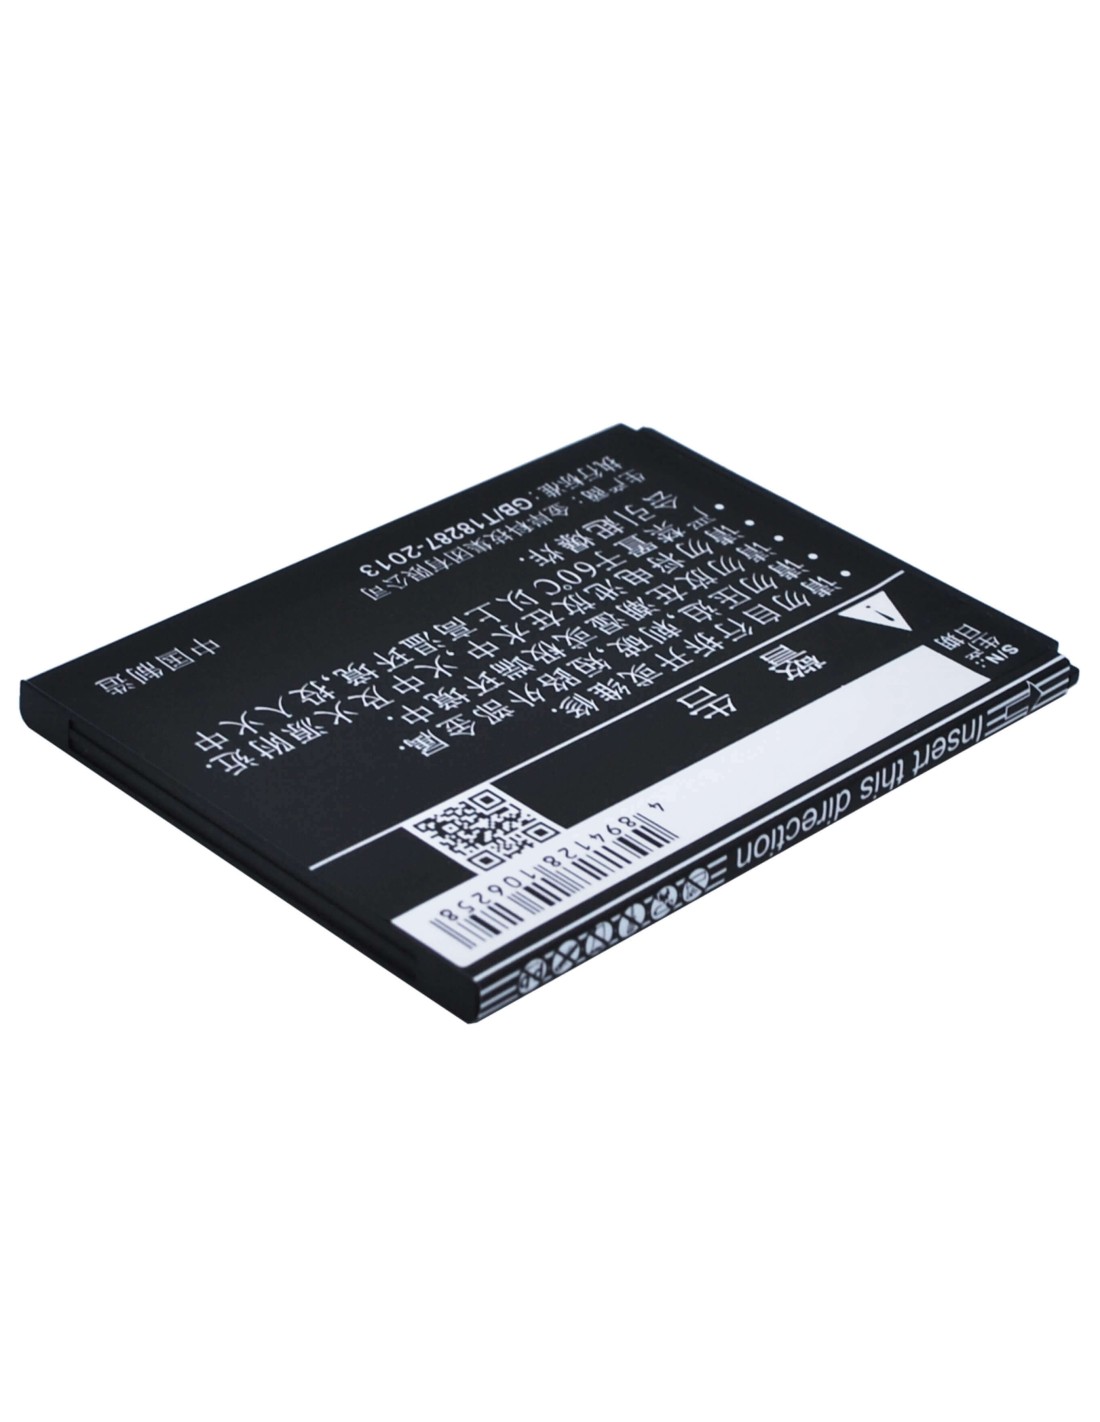 Battery for Coolpad 5263, 5360 3.7V, 1450mAh - 5.37Wh